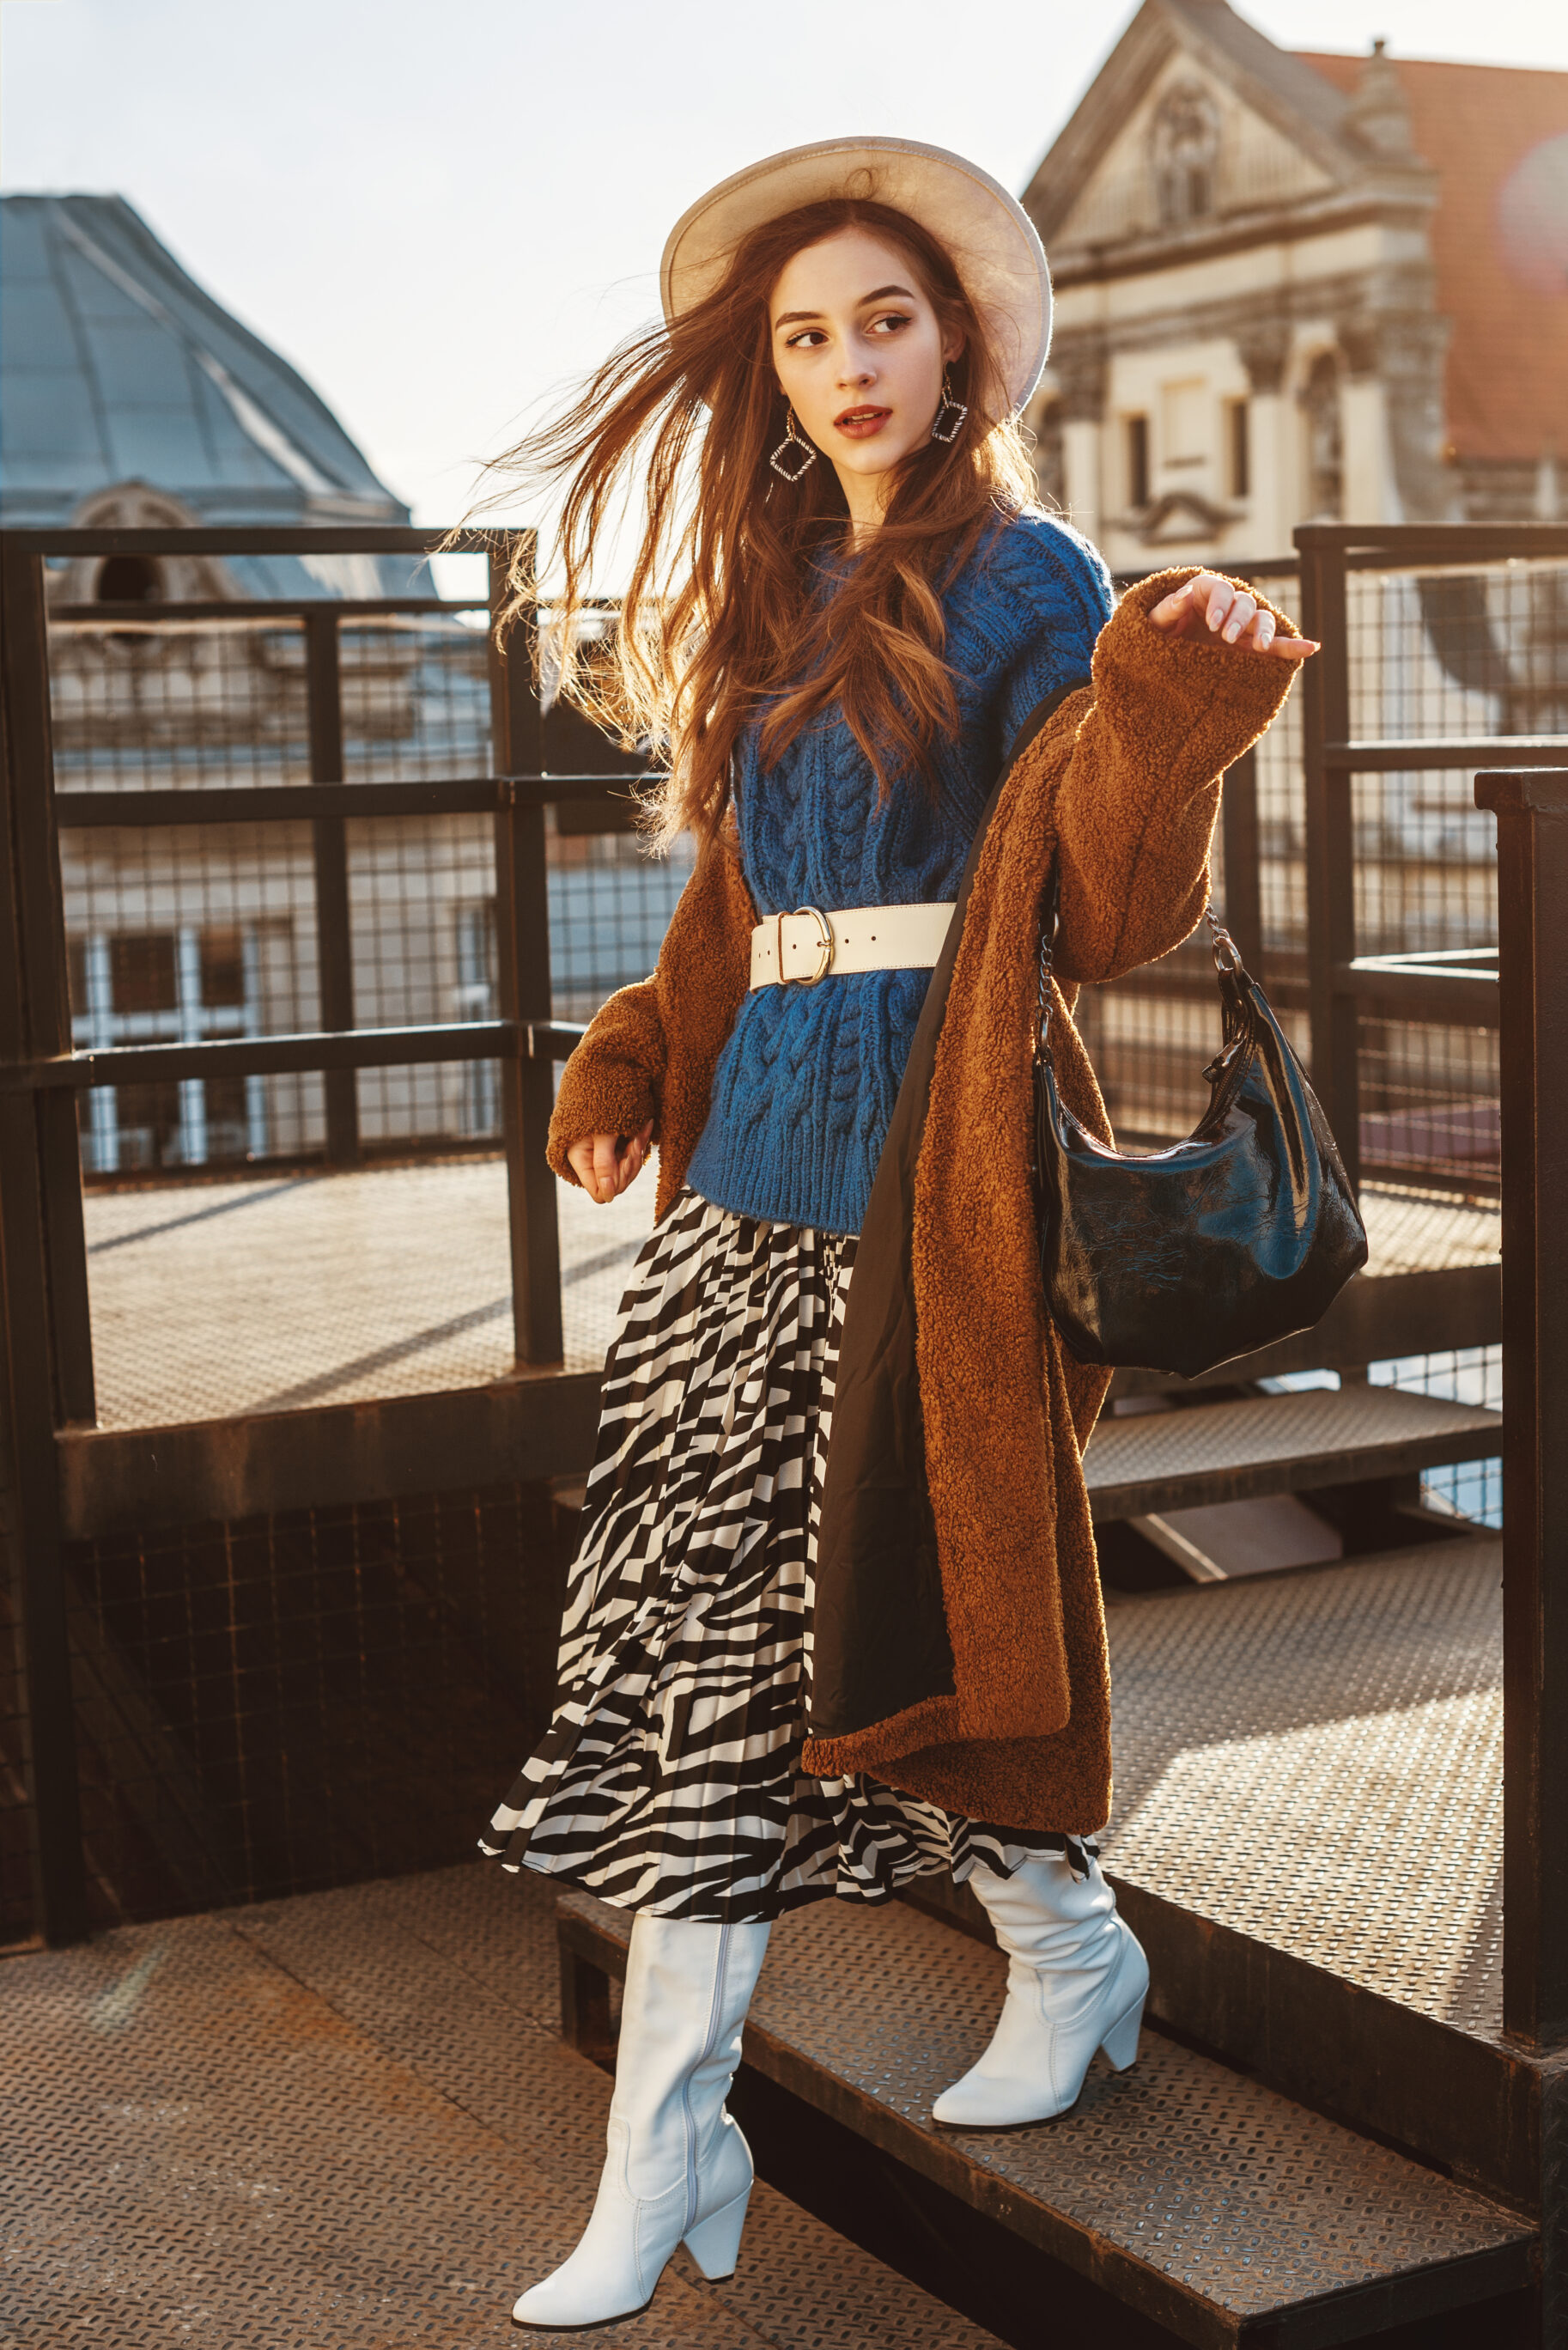 Brown Faux Fur Coat, Blue Knitted Sweater, Wide Belt, Pleated Zebra Print Skirt & White High Boots